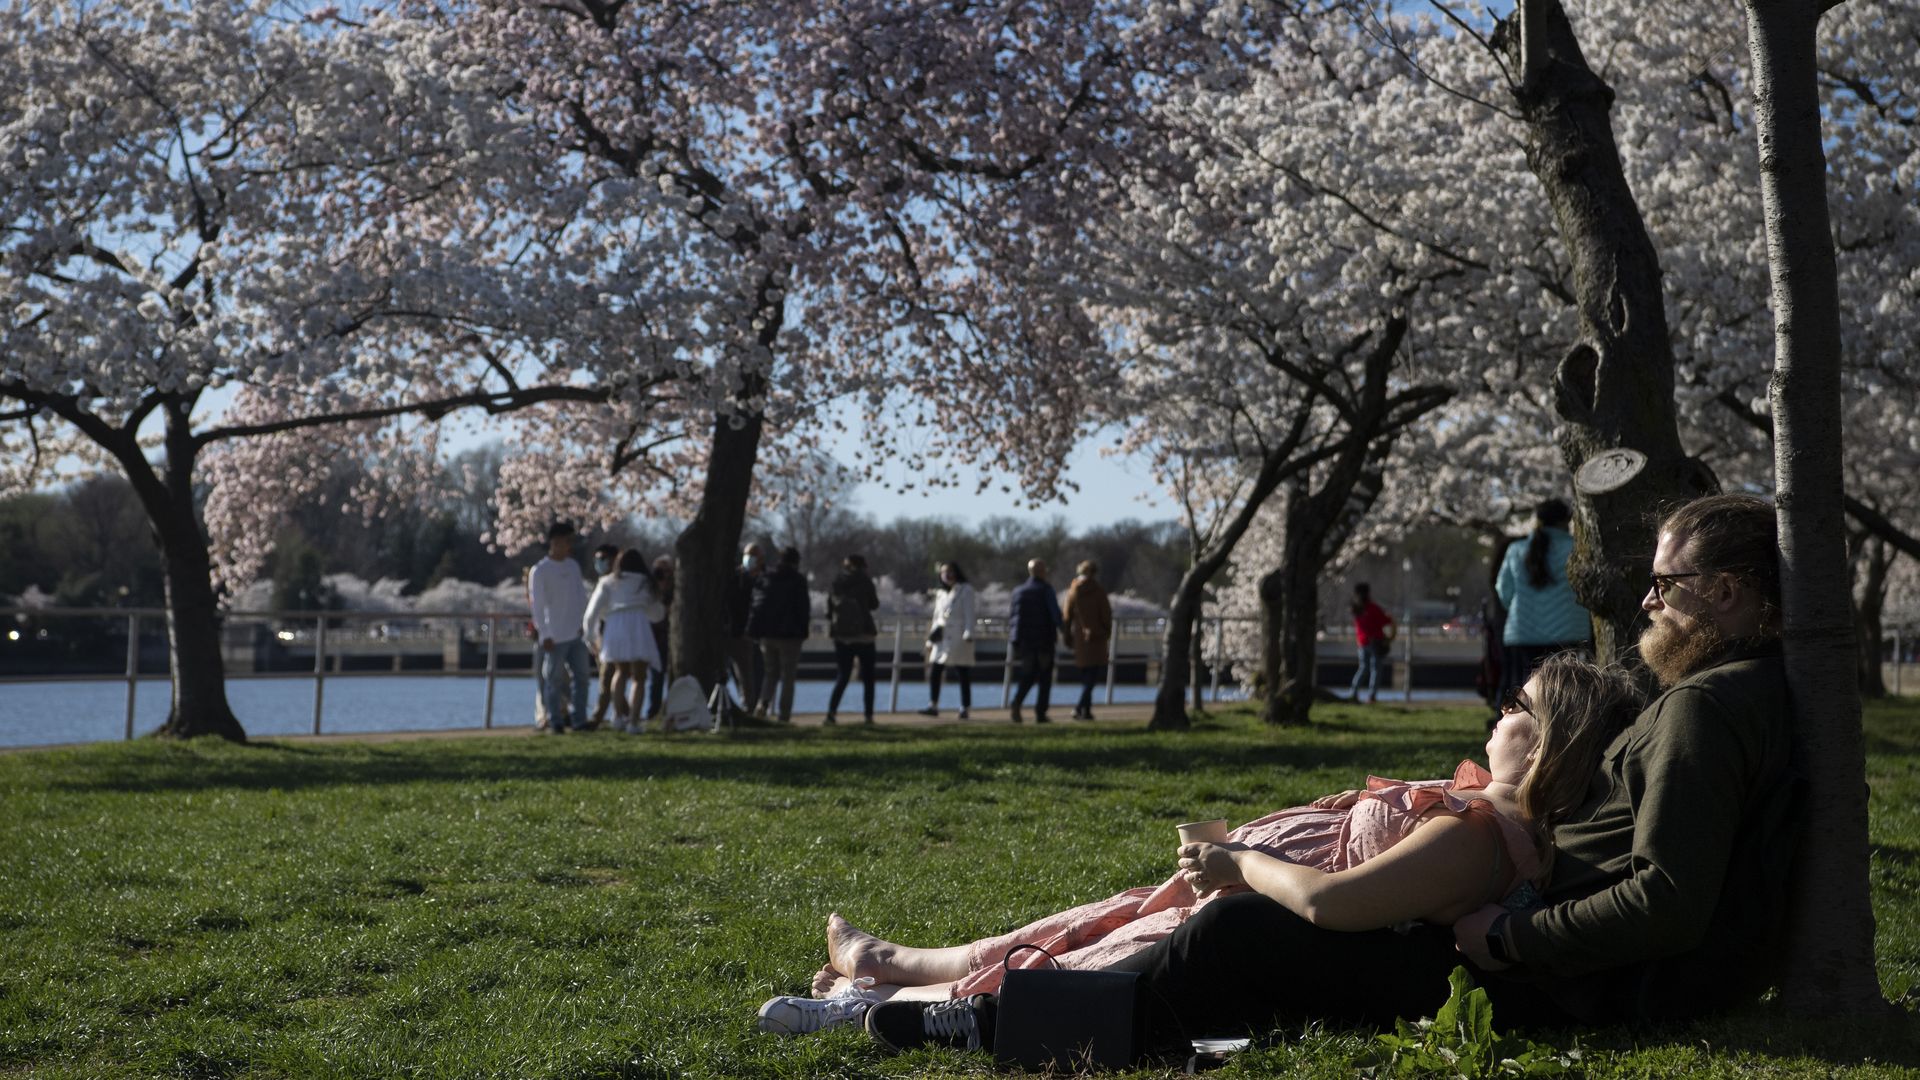 People relax on the lawn under blooming cherry blossom trees.